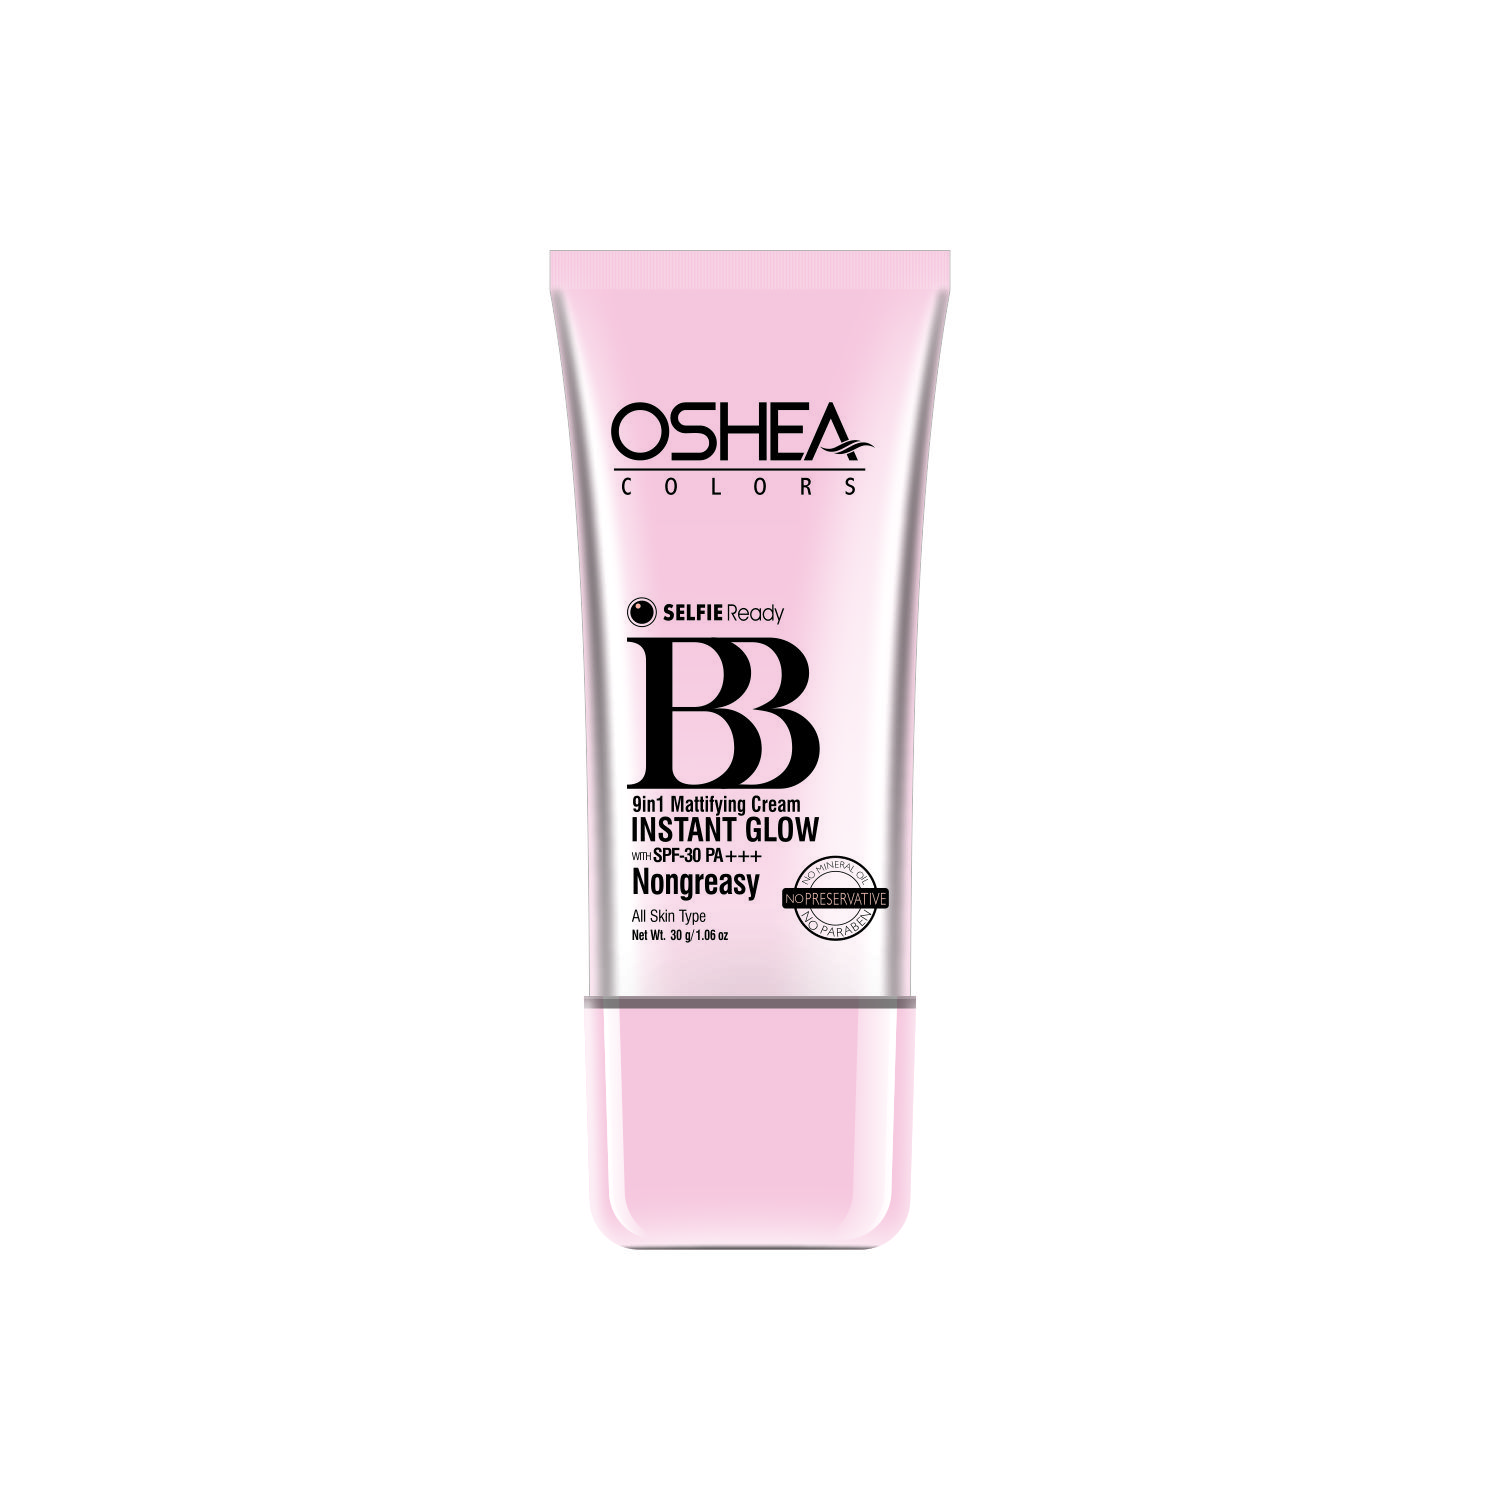 Instant glow with Oshea’s BB 9-in-1 mattifying cream